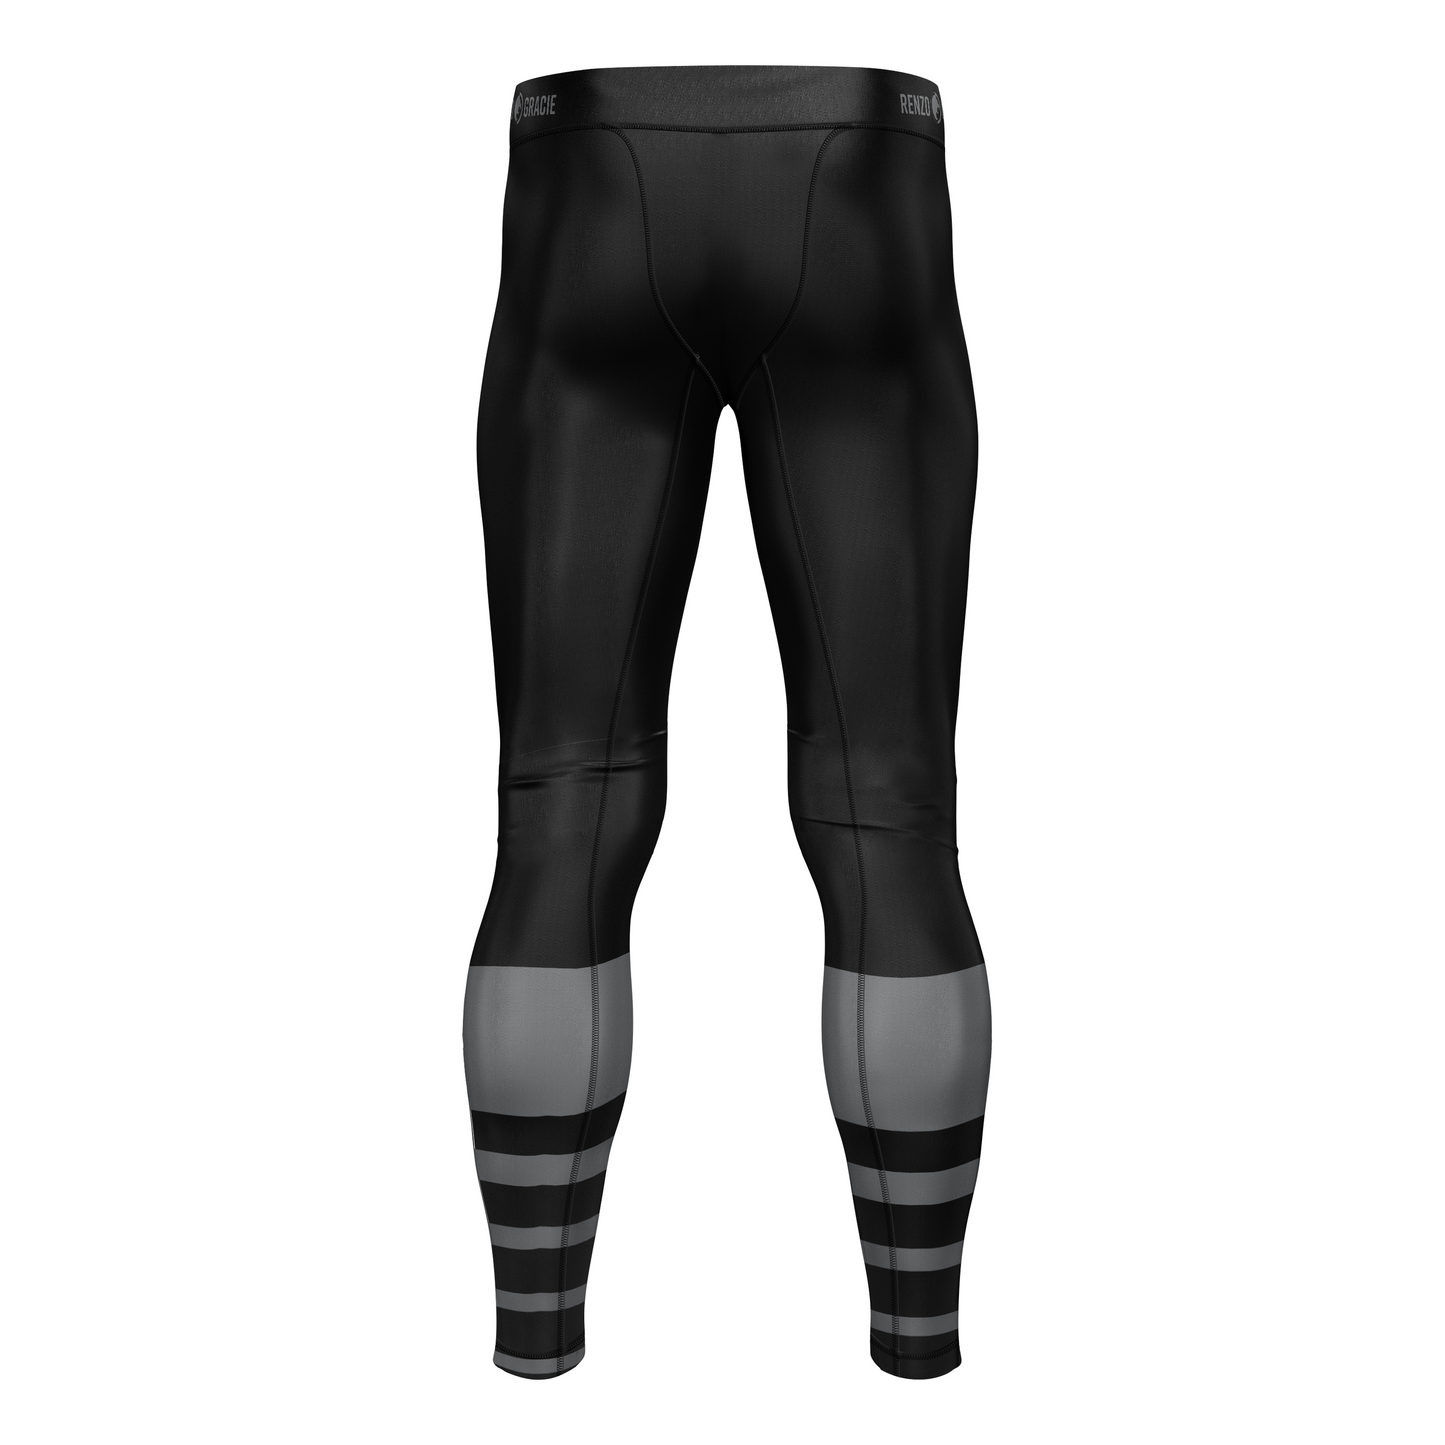 Renzo Gracie Katy men's grappling tights Standard Issue, black and grey